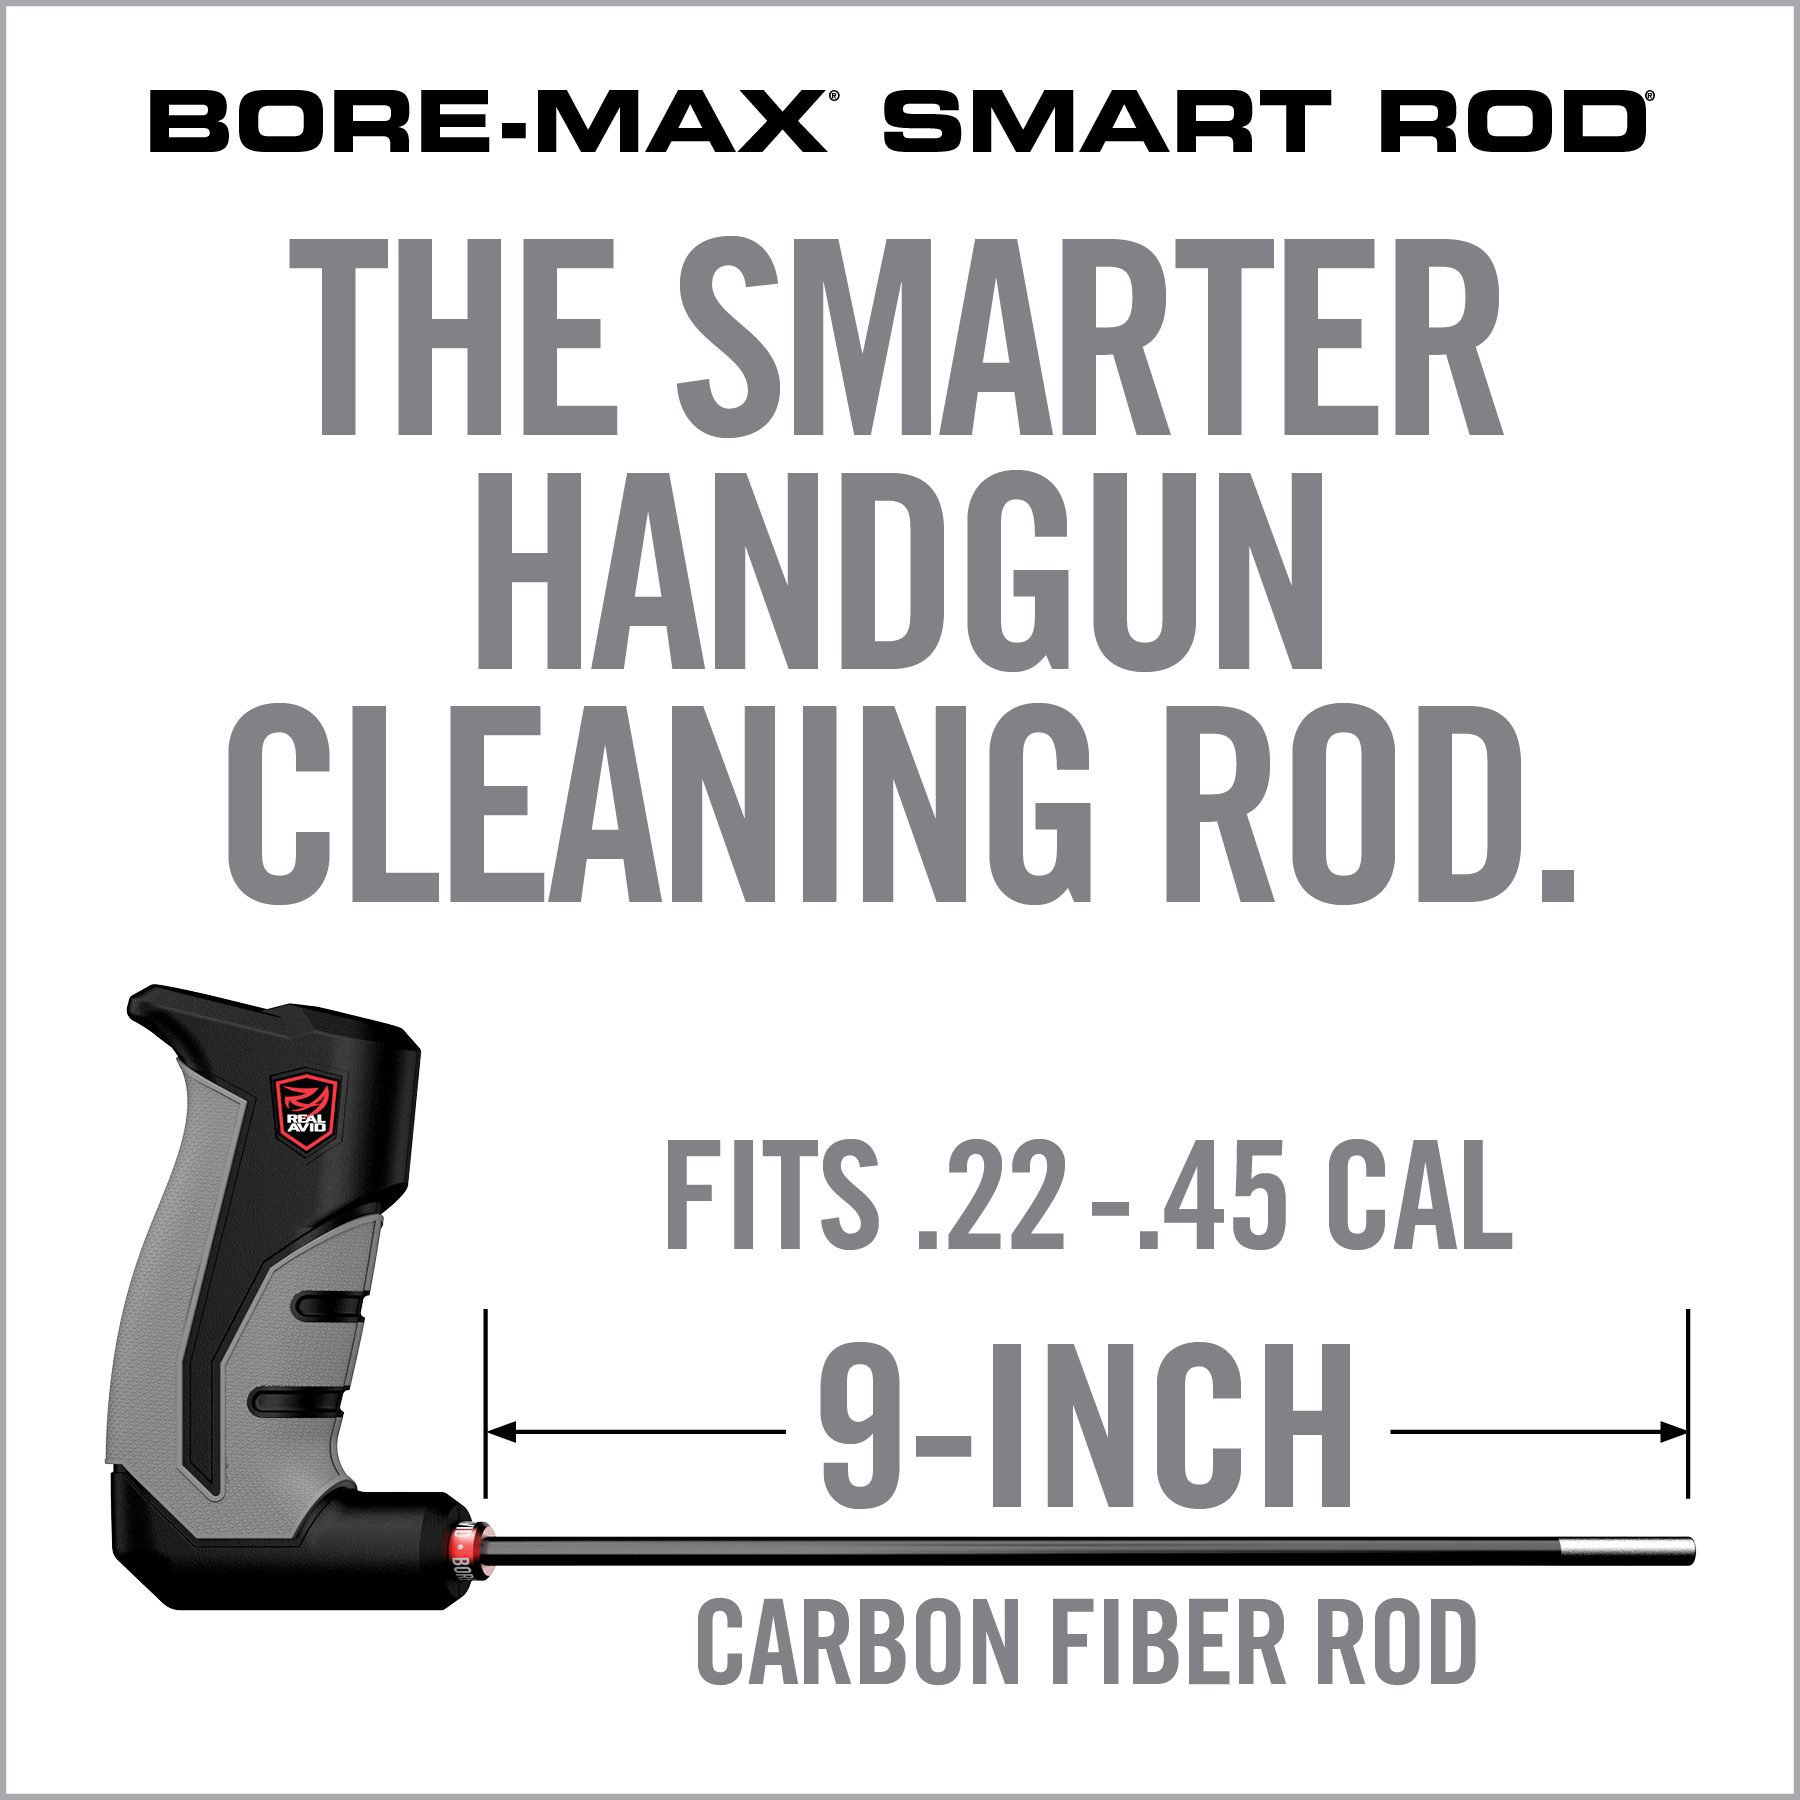 the smart hand gun cleaning rod is shown